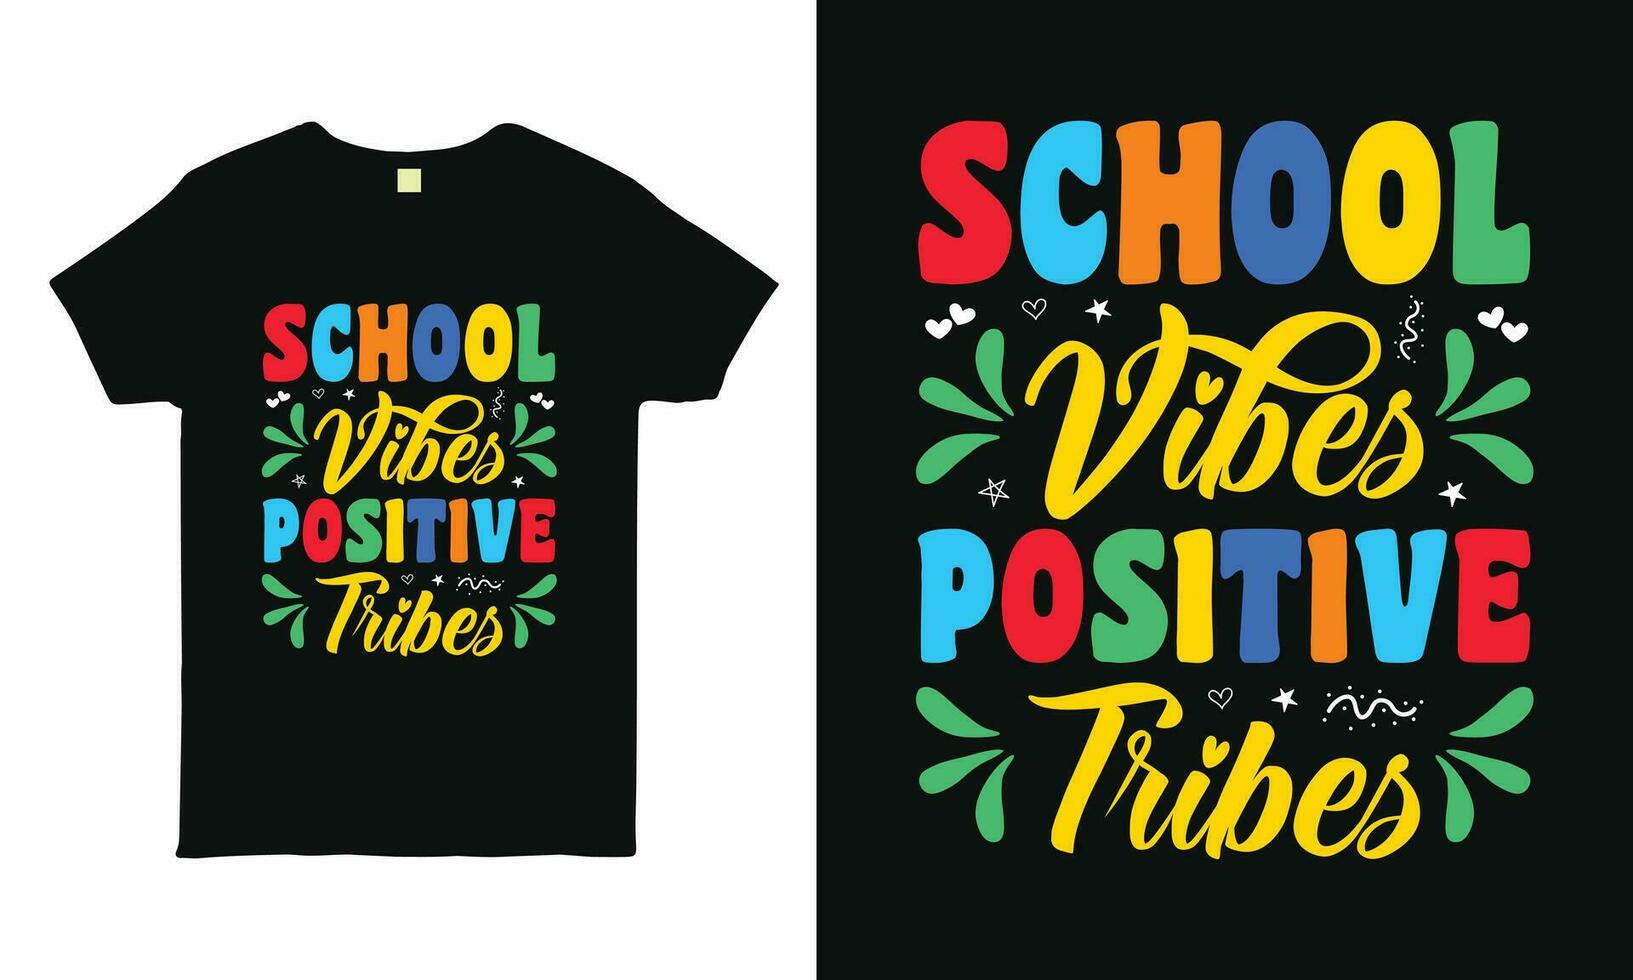 Dynamic 'School  vibes, positive tribes' typography tee, perfect for back to school vibes. Inspiring and vibrant design vector